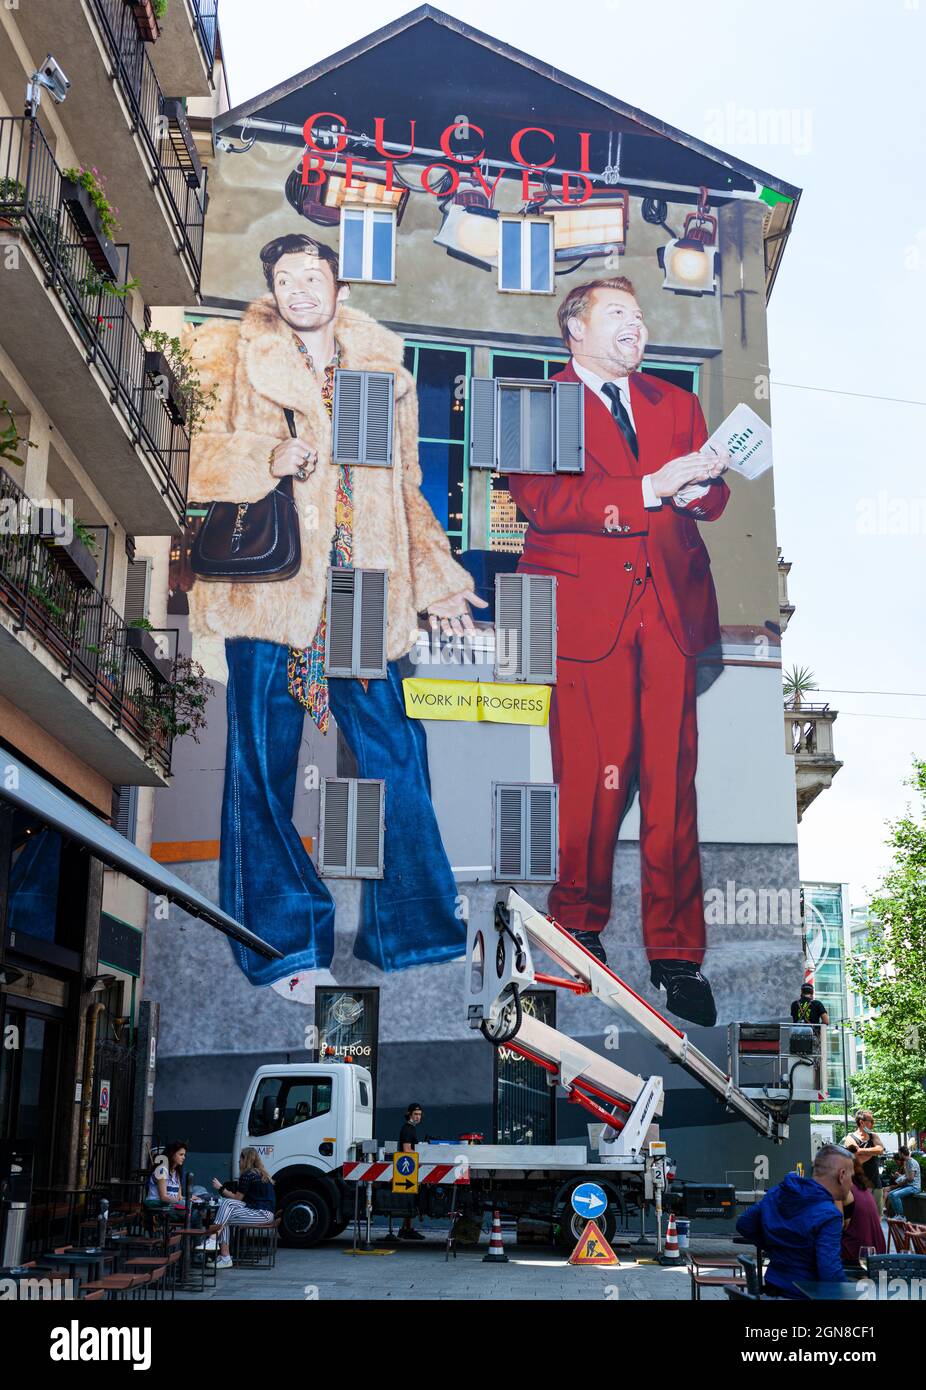 Milan, Italy - June 30: View of the Belowed show; the murales of Harry and  James Corden by Harmony Korine at Gucci Wall of Milan on June 30, 2021  Stock Photo - Alamy